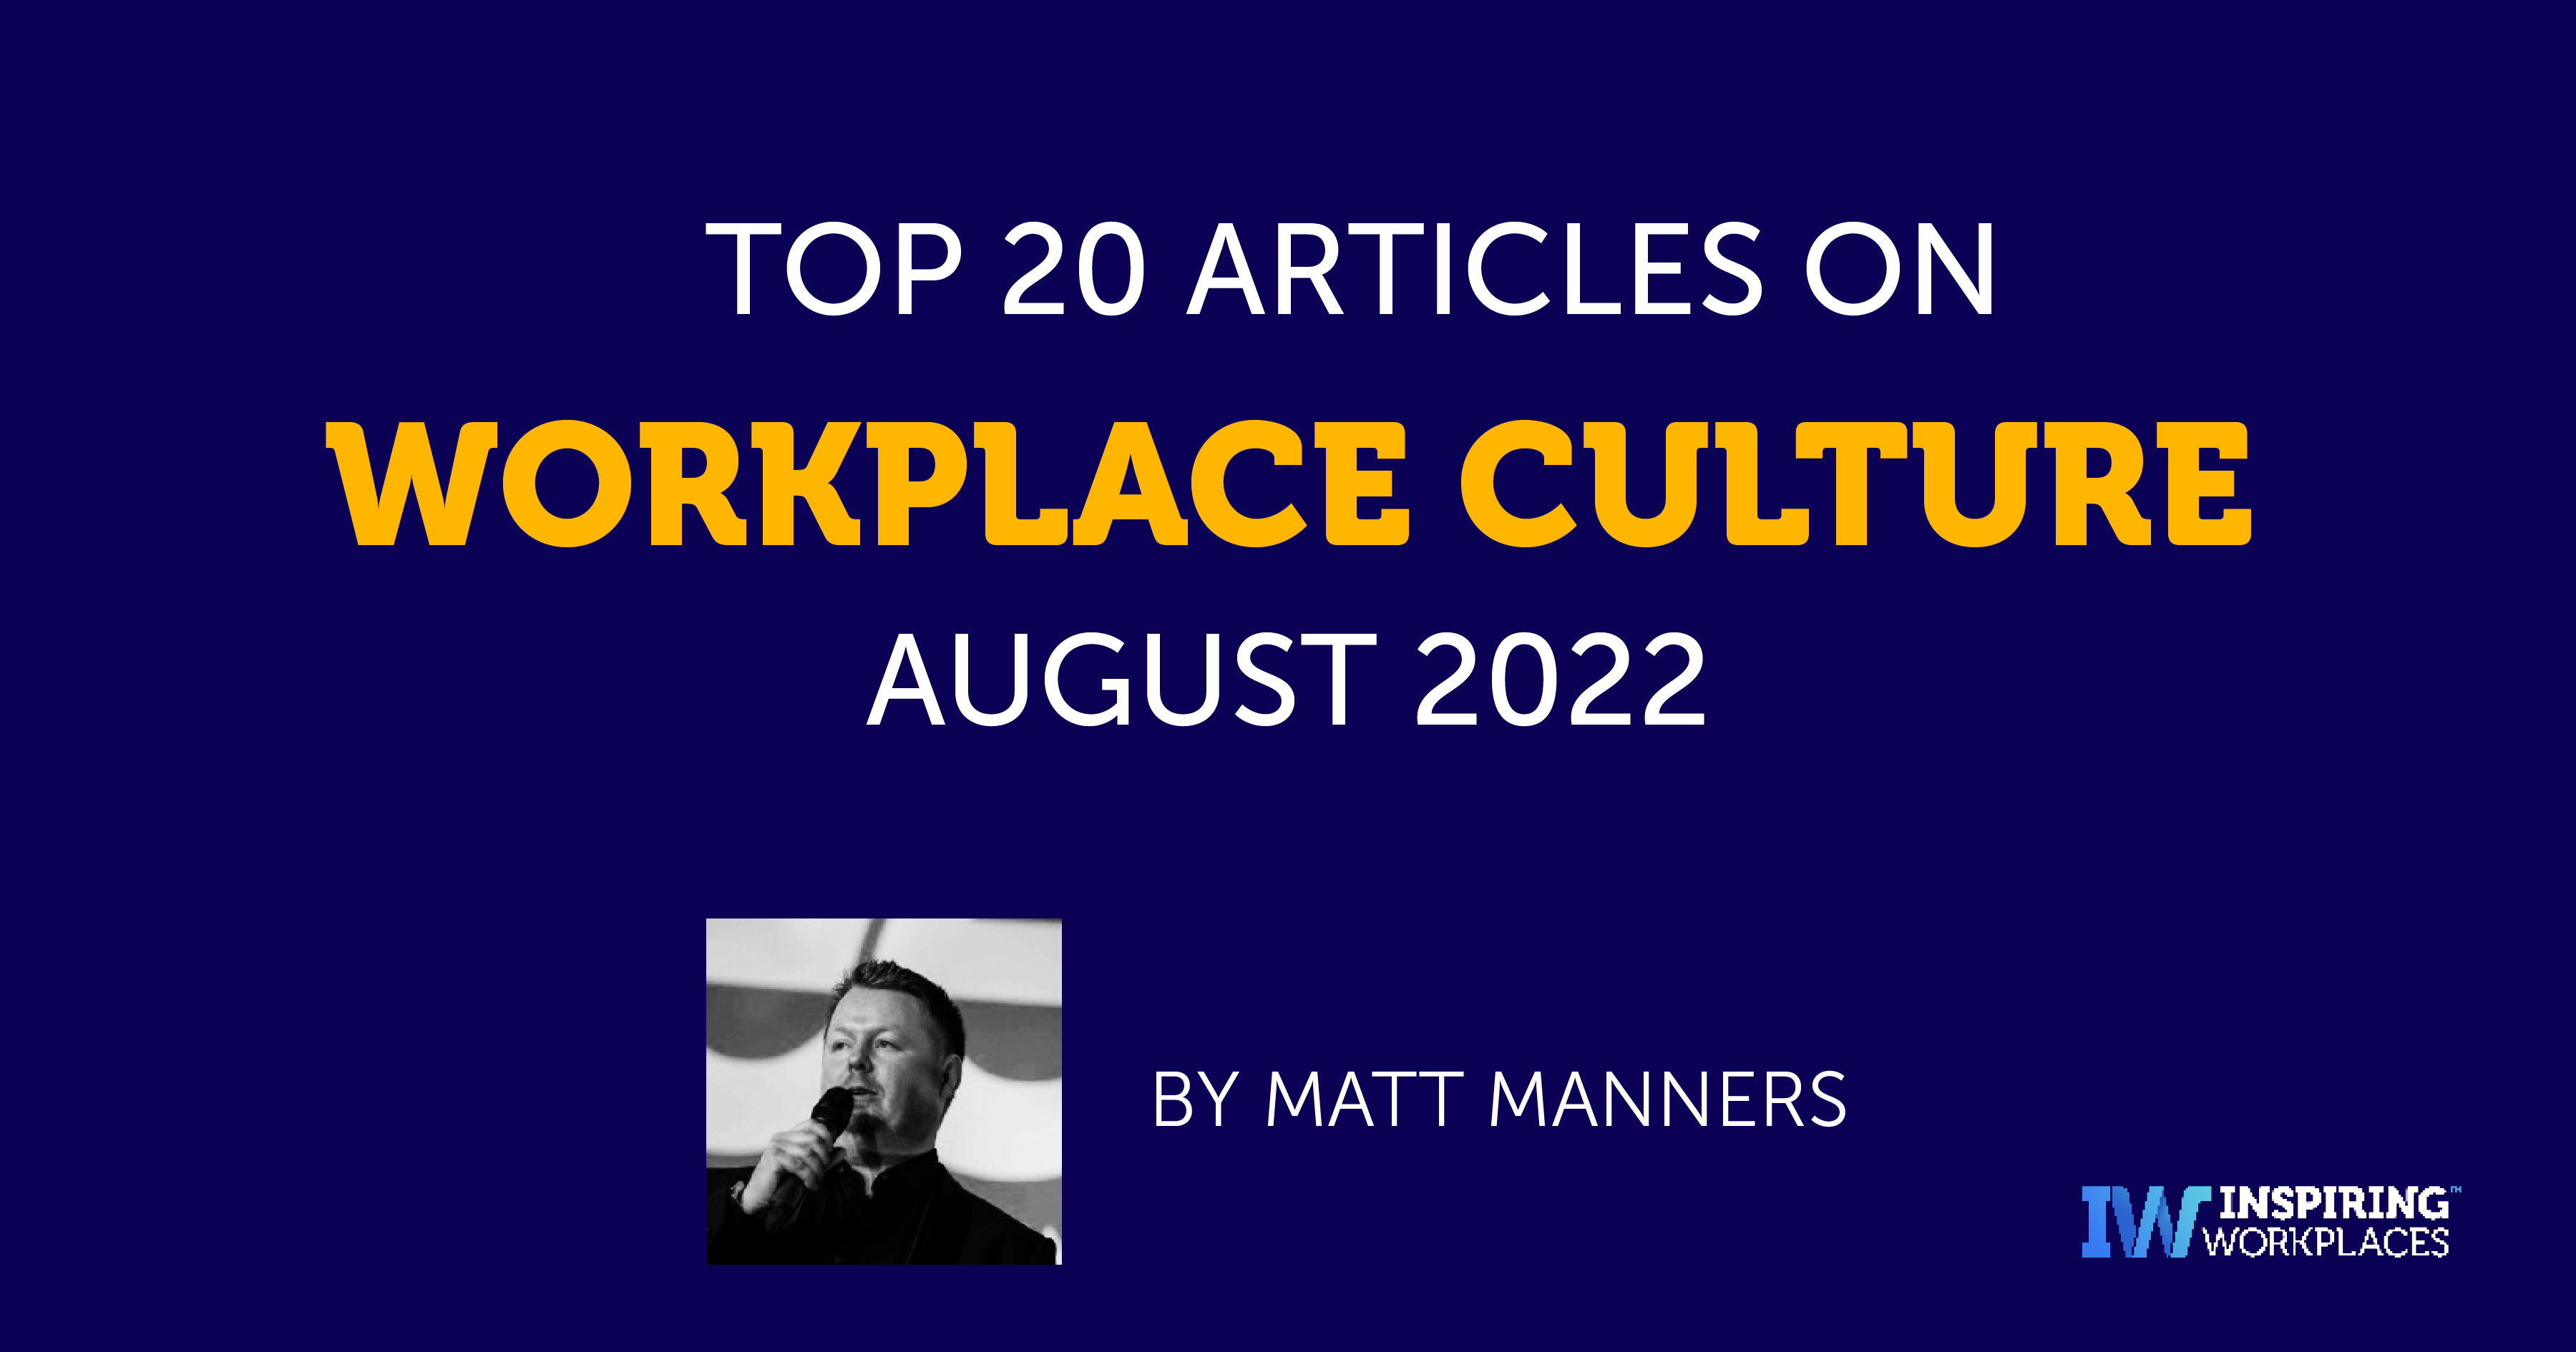 Top 20 Articles on Workplace Culture for August 2022